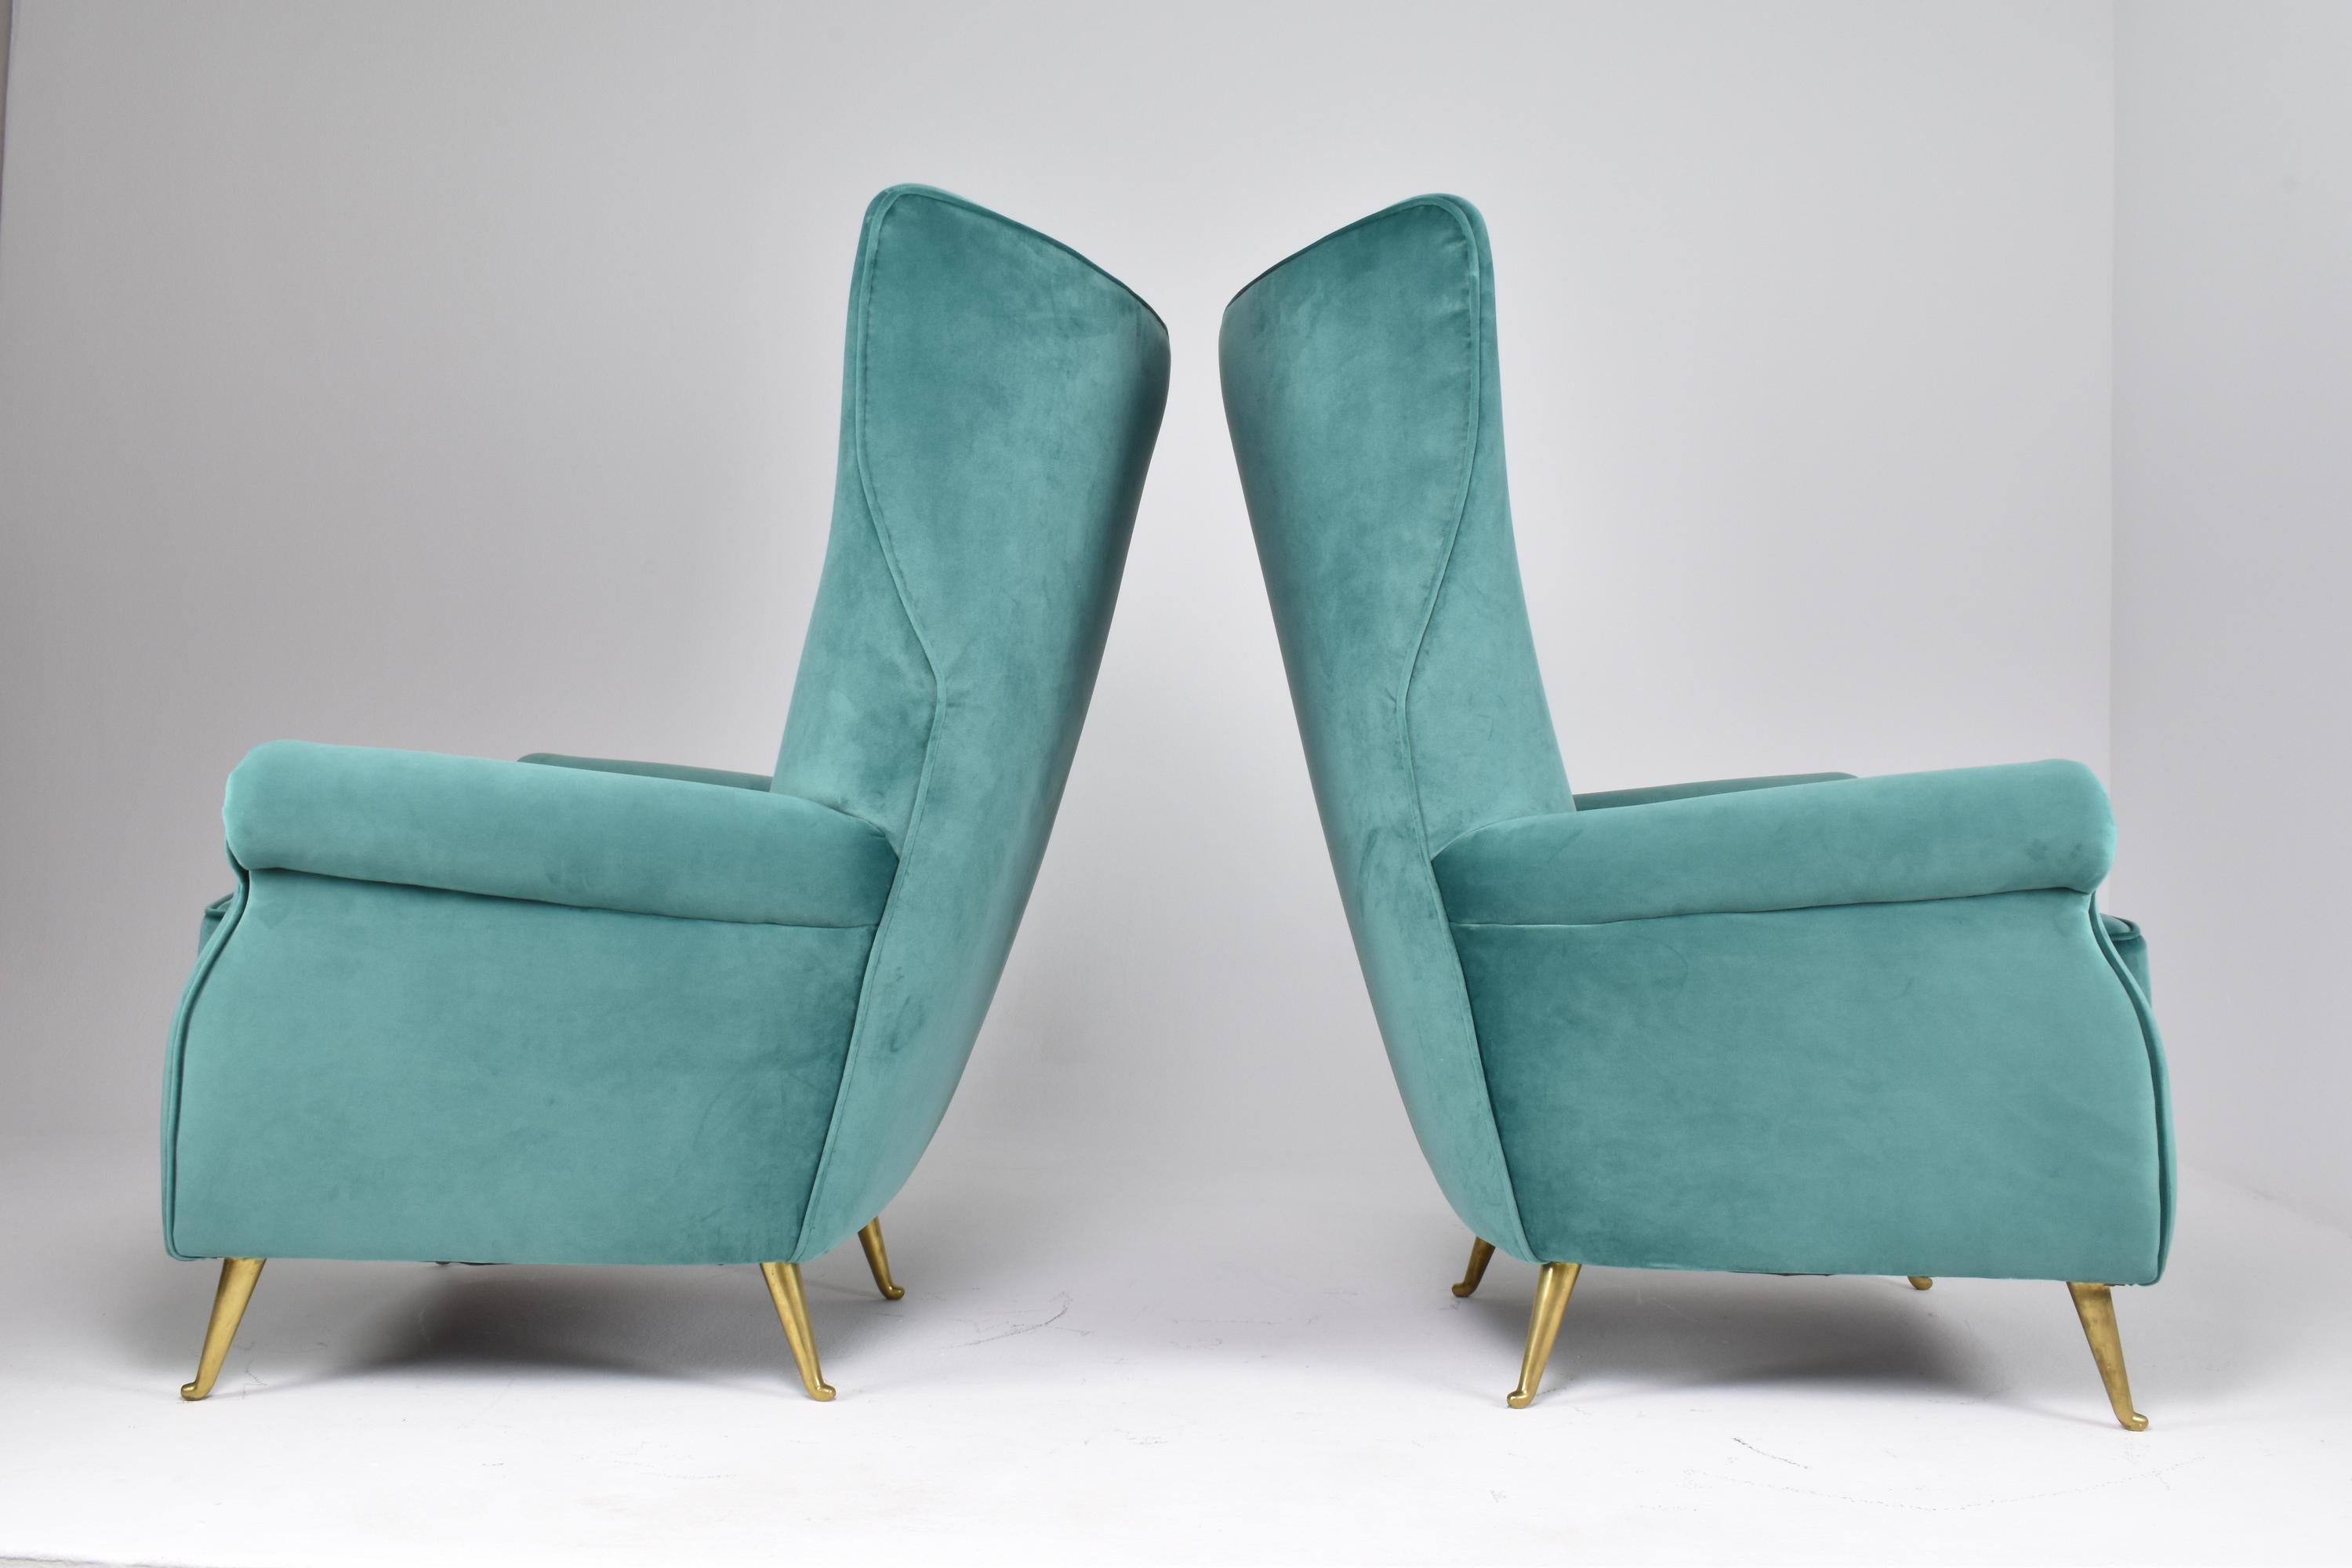 Italian Midcentury Armchairs by ISA Bergamo, Set of Two, 1950s For Sale 6